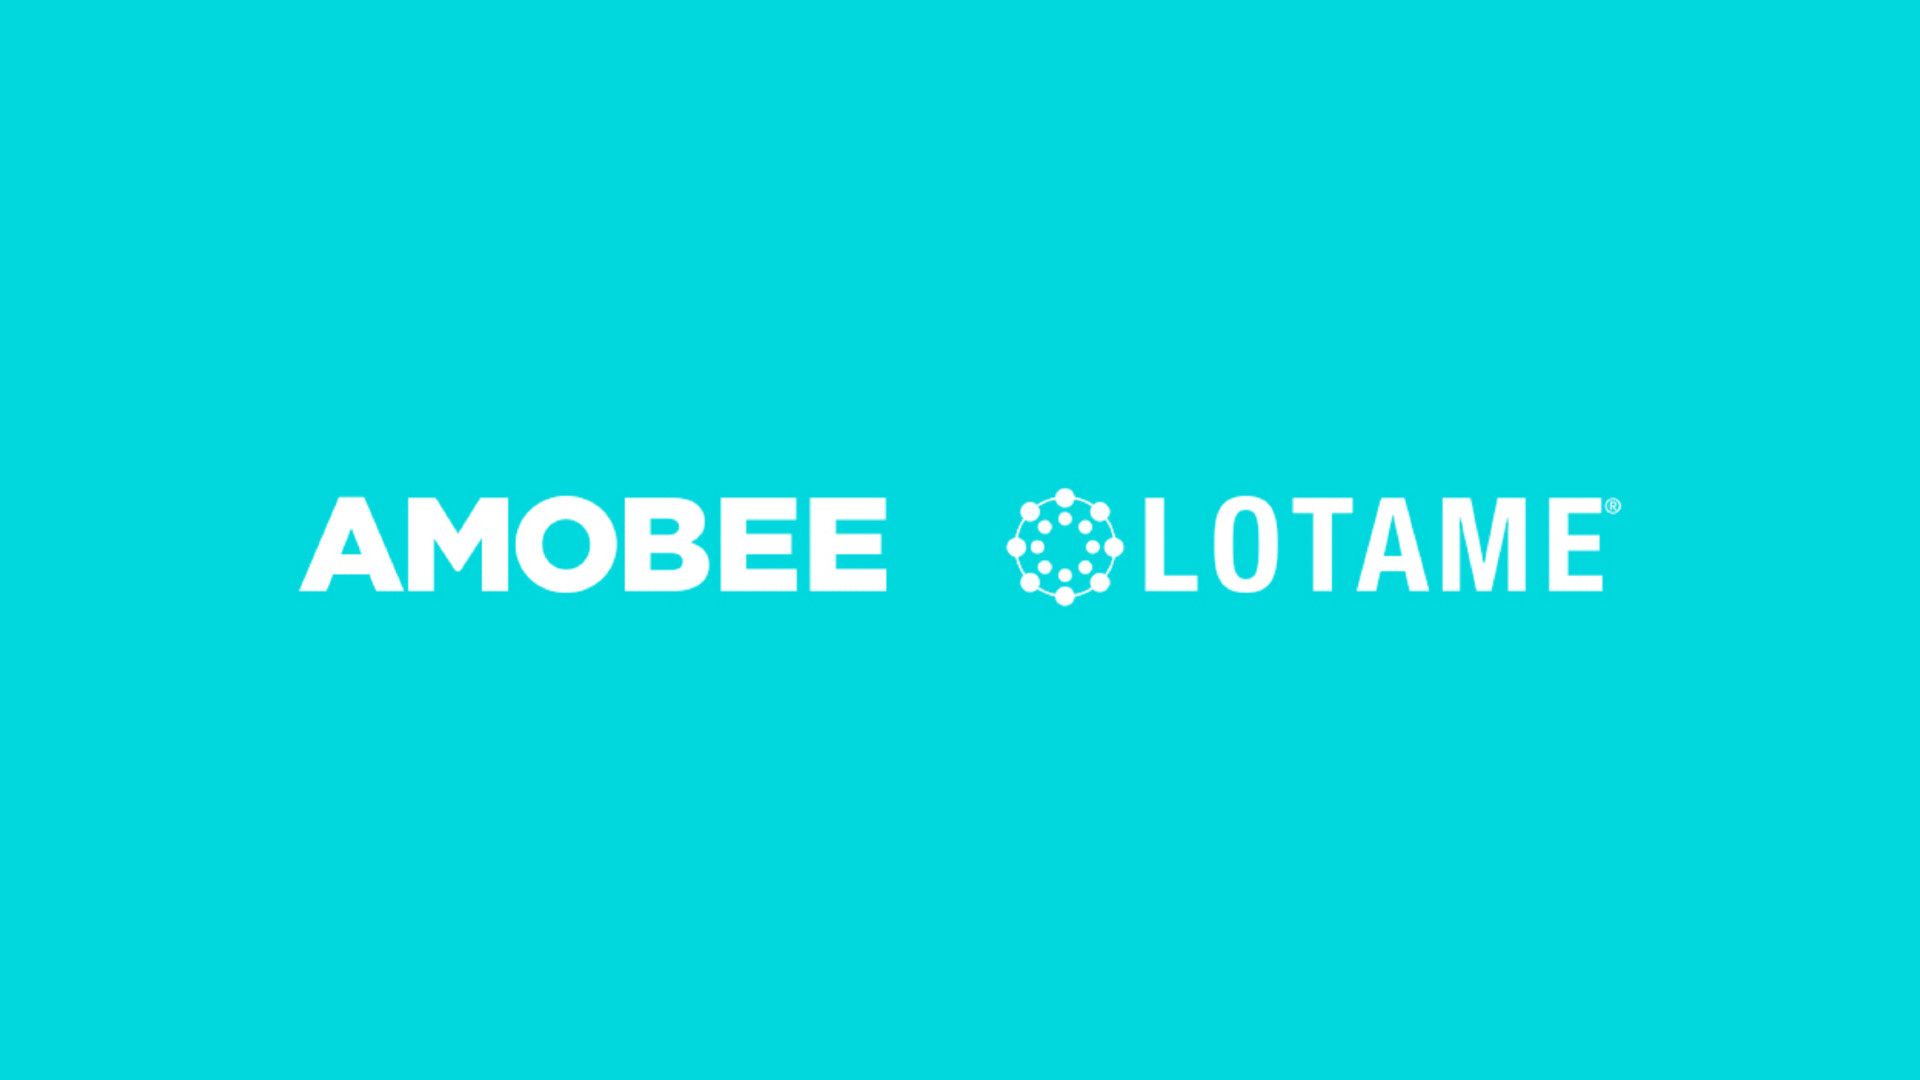 Amobee partners with Lotame expanding the audiences across social networks